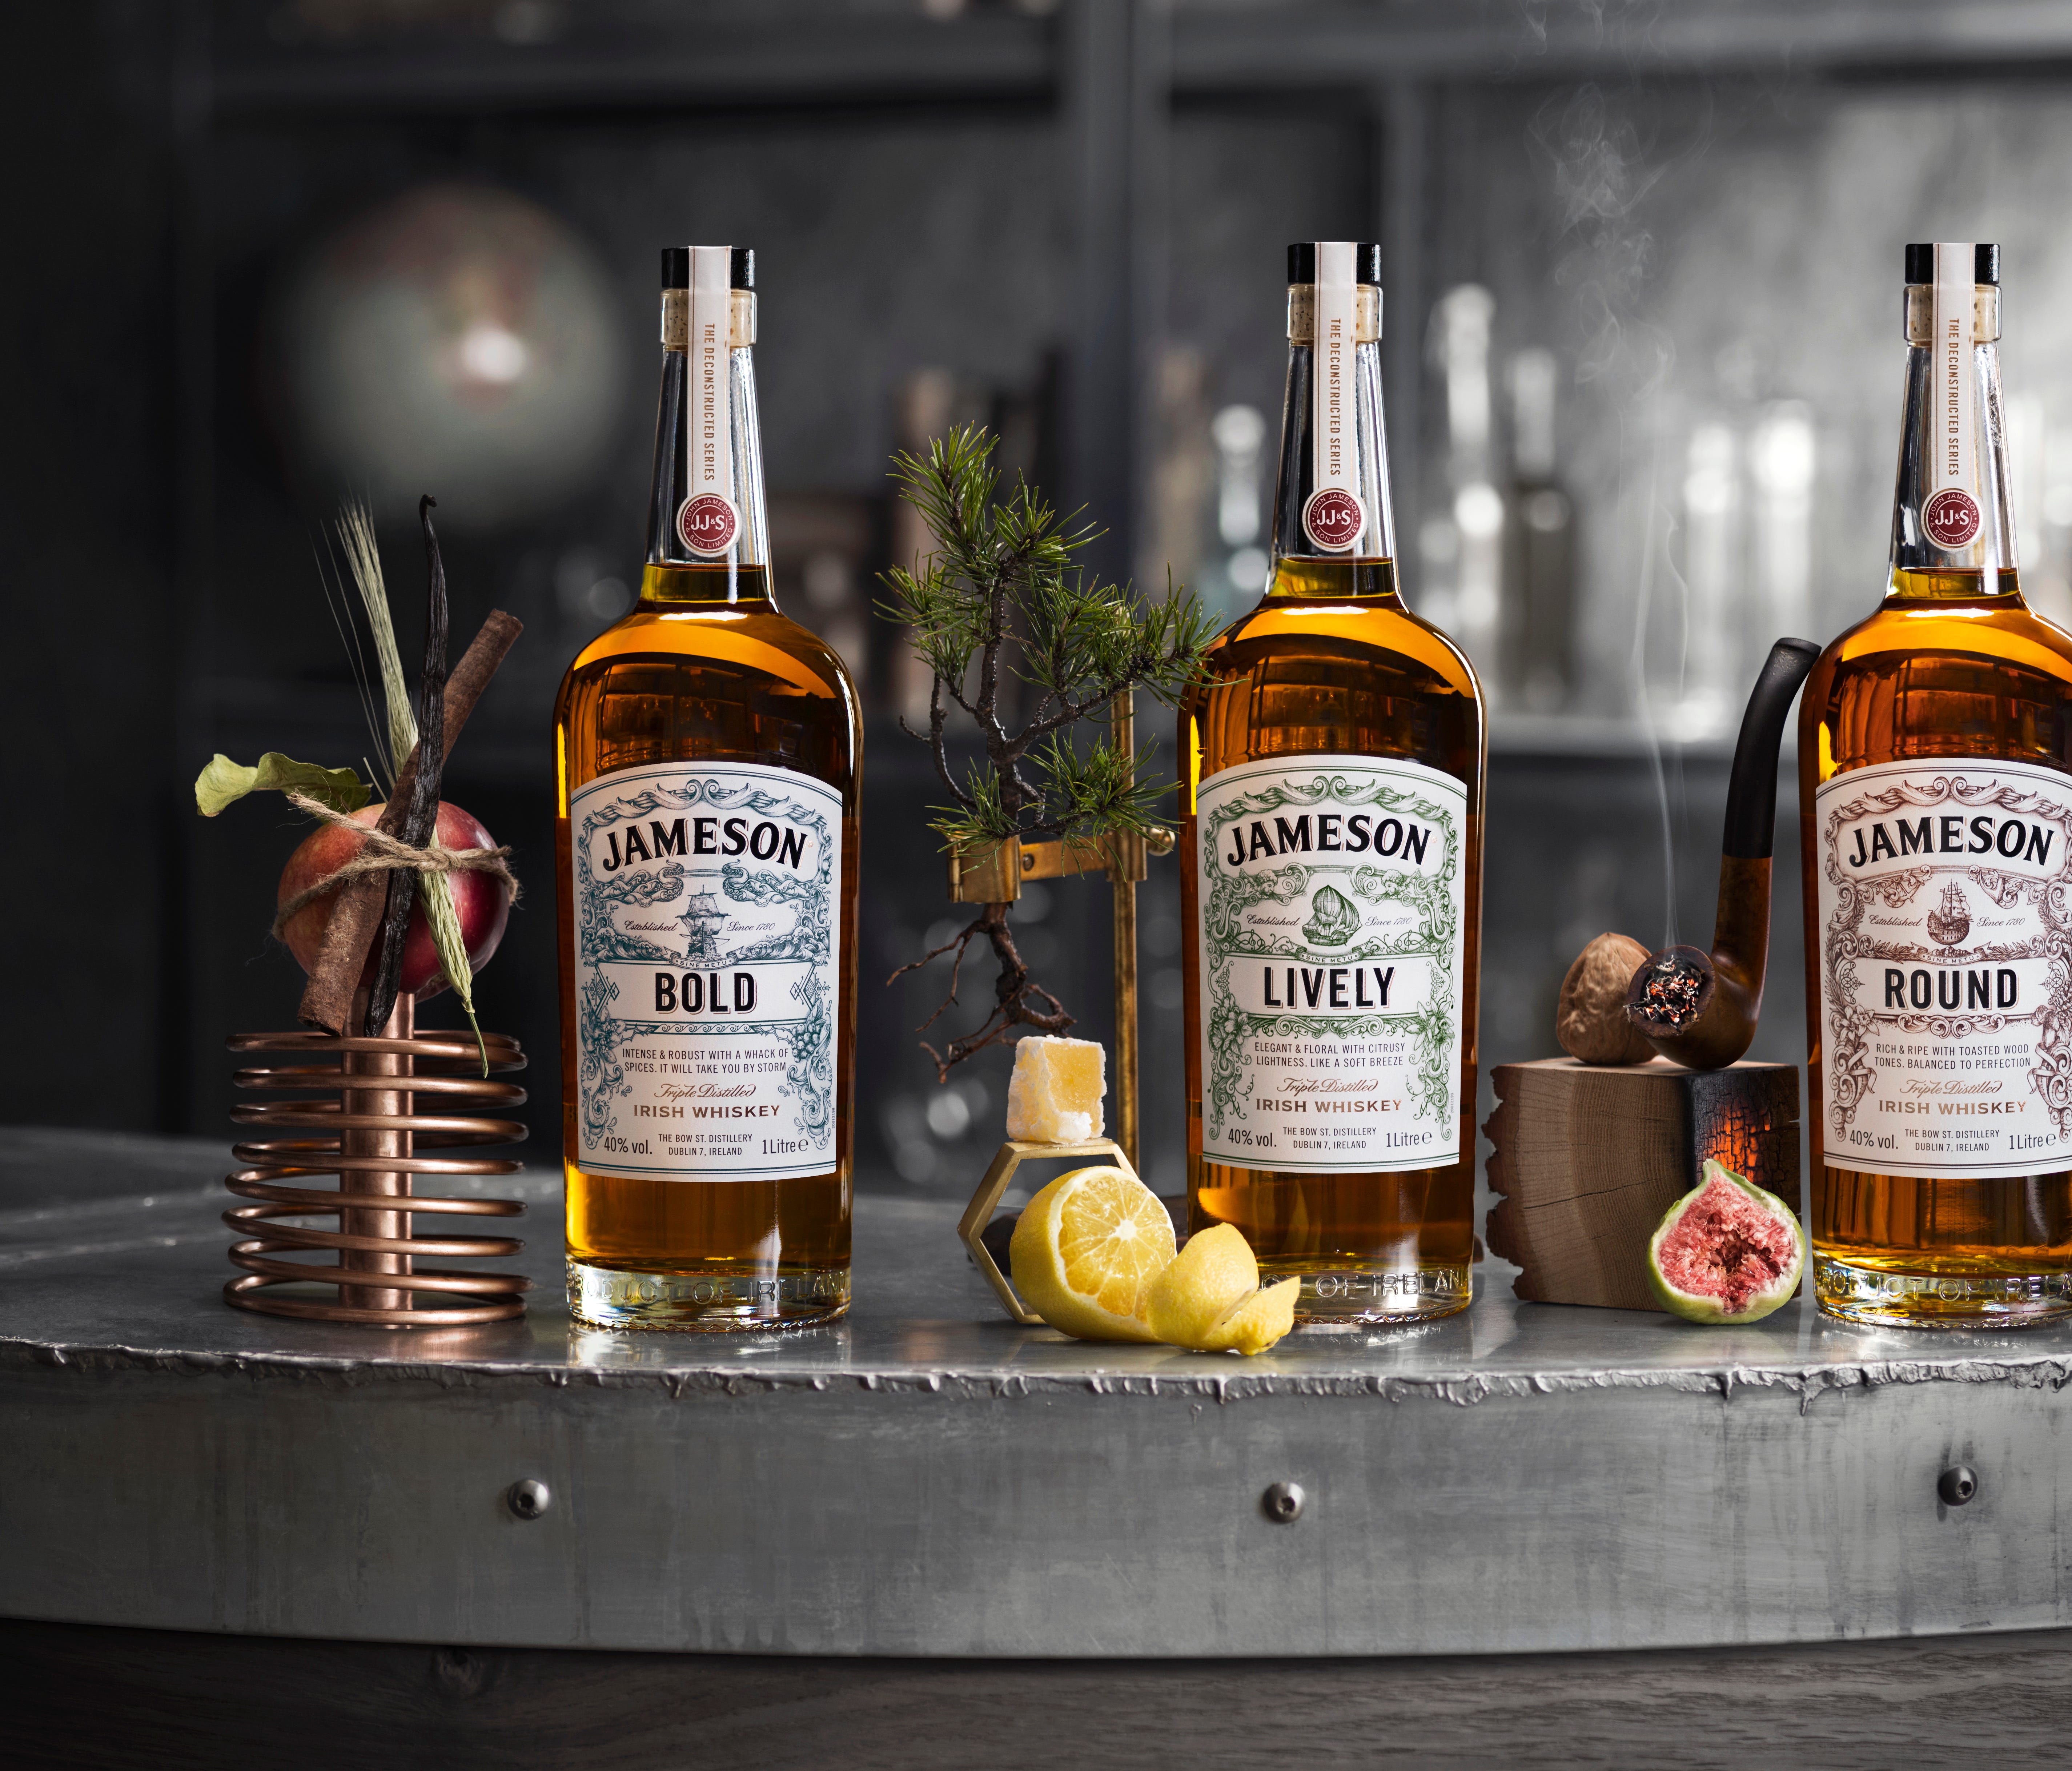 The ever popular Jameson Irish Whiskey launched a travel retail exclusive last year called the Deconstructed Series ($42). This trio of whiskeys focuses on the elements that go into classic Jameson: Bold is influenced by pot still whiskey, Lively is 